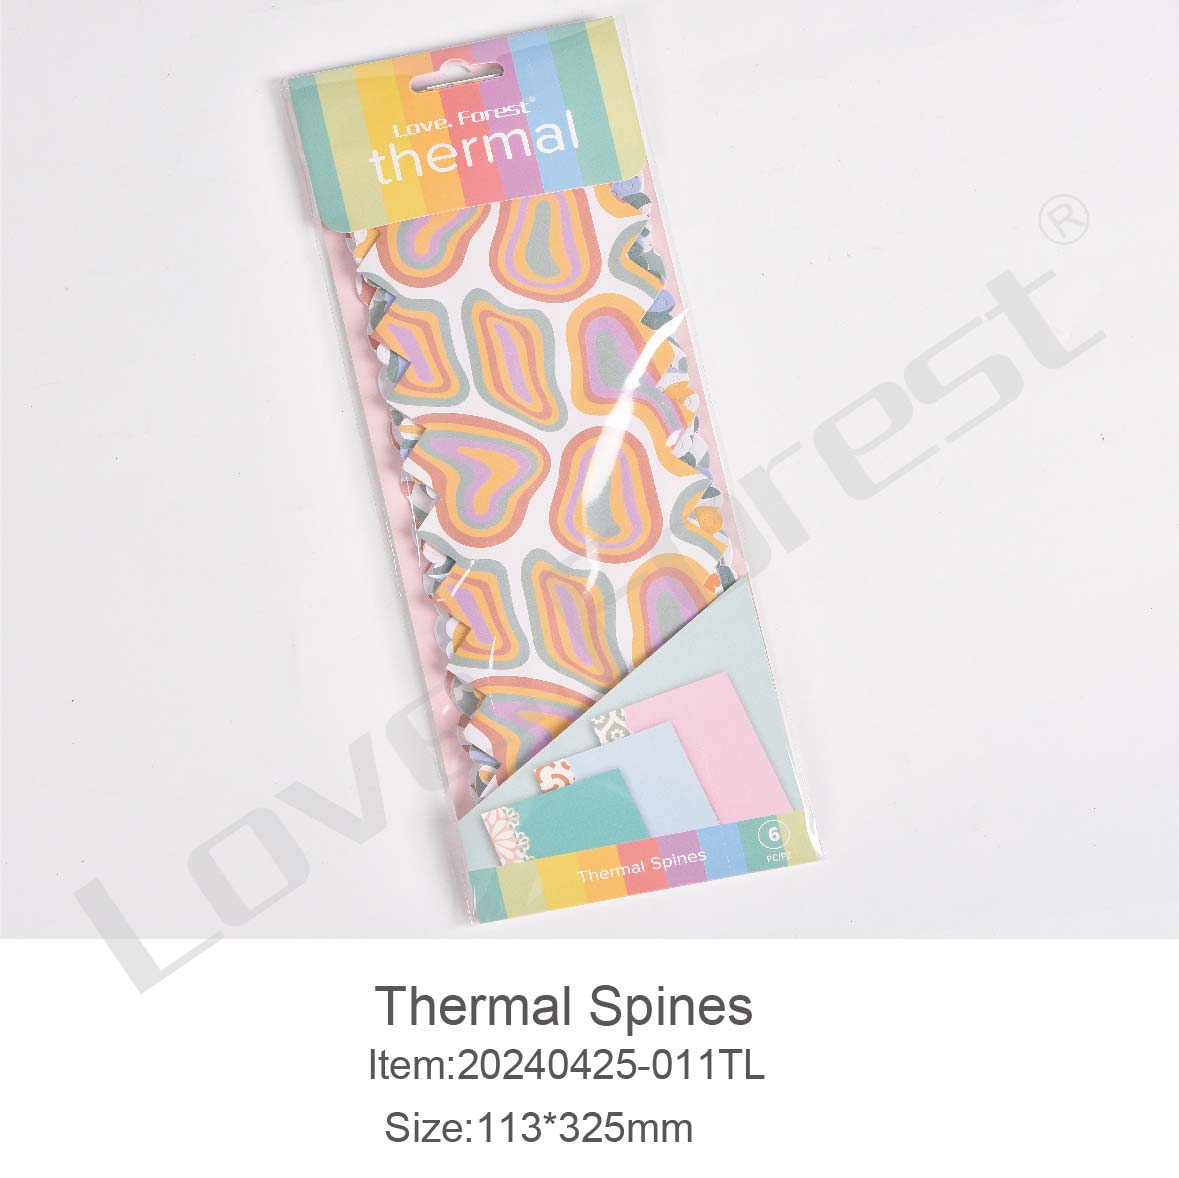 Thermal Spines